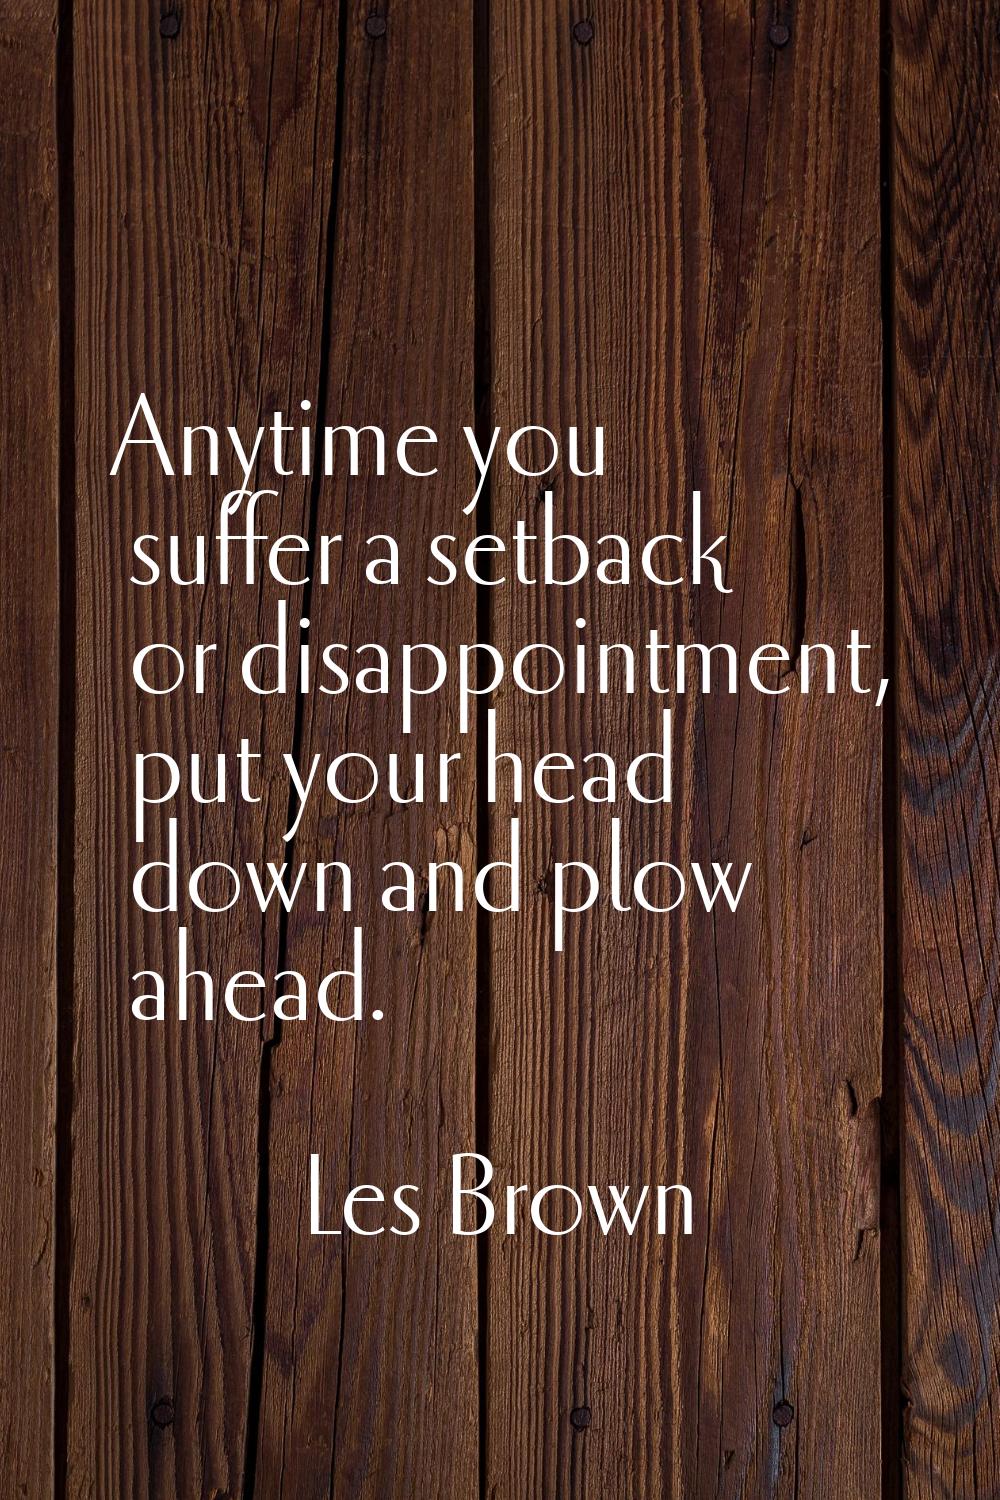 Anytime you suffer a setback or disappointment, put your head down and plow ahead.